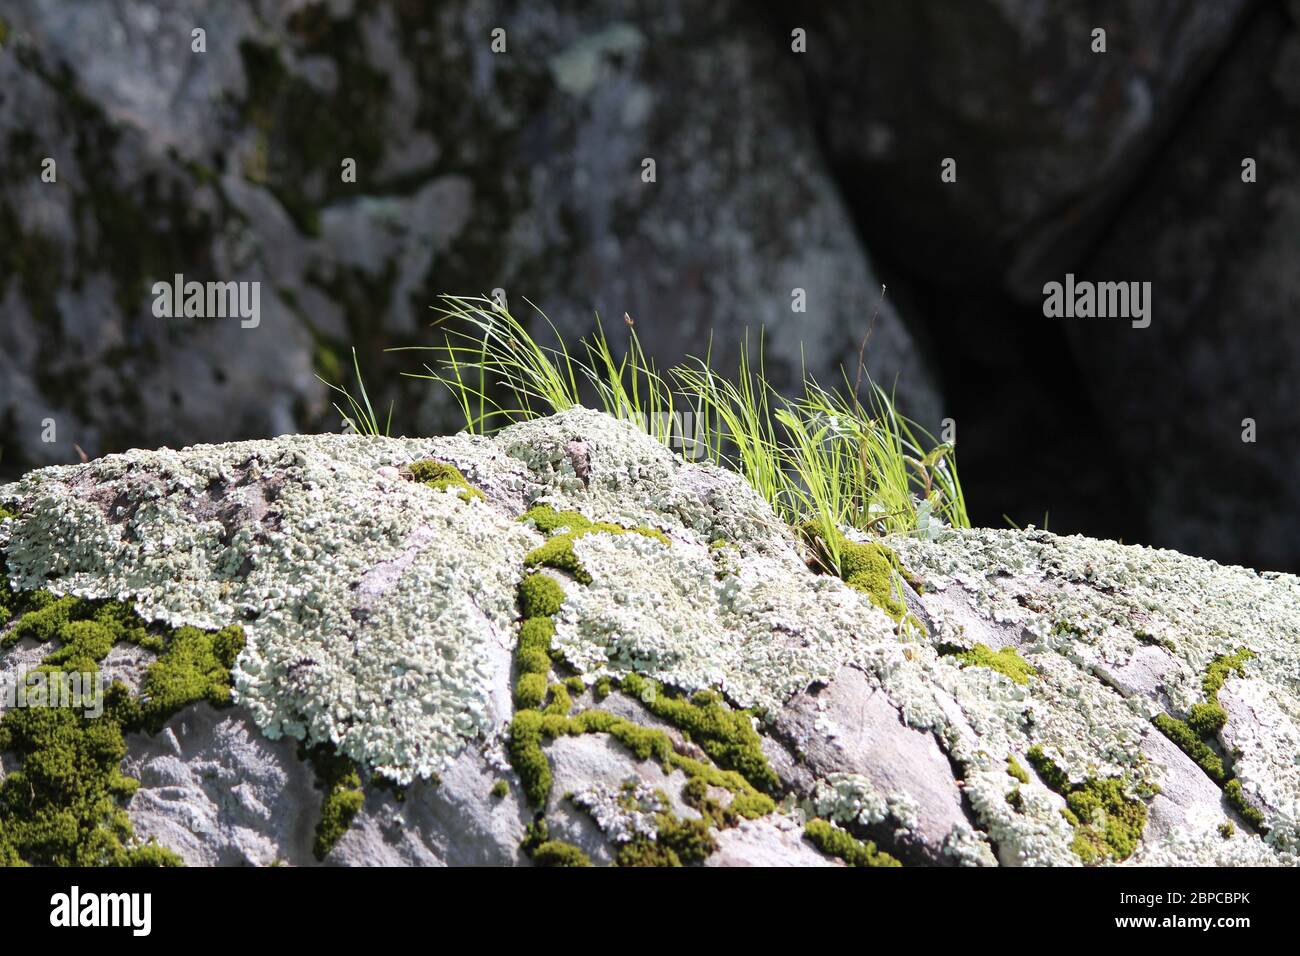 Grass growing on rocks with moss and lichen Stock Photo